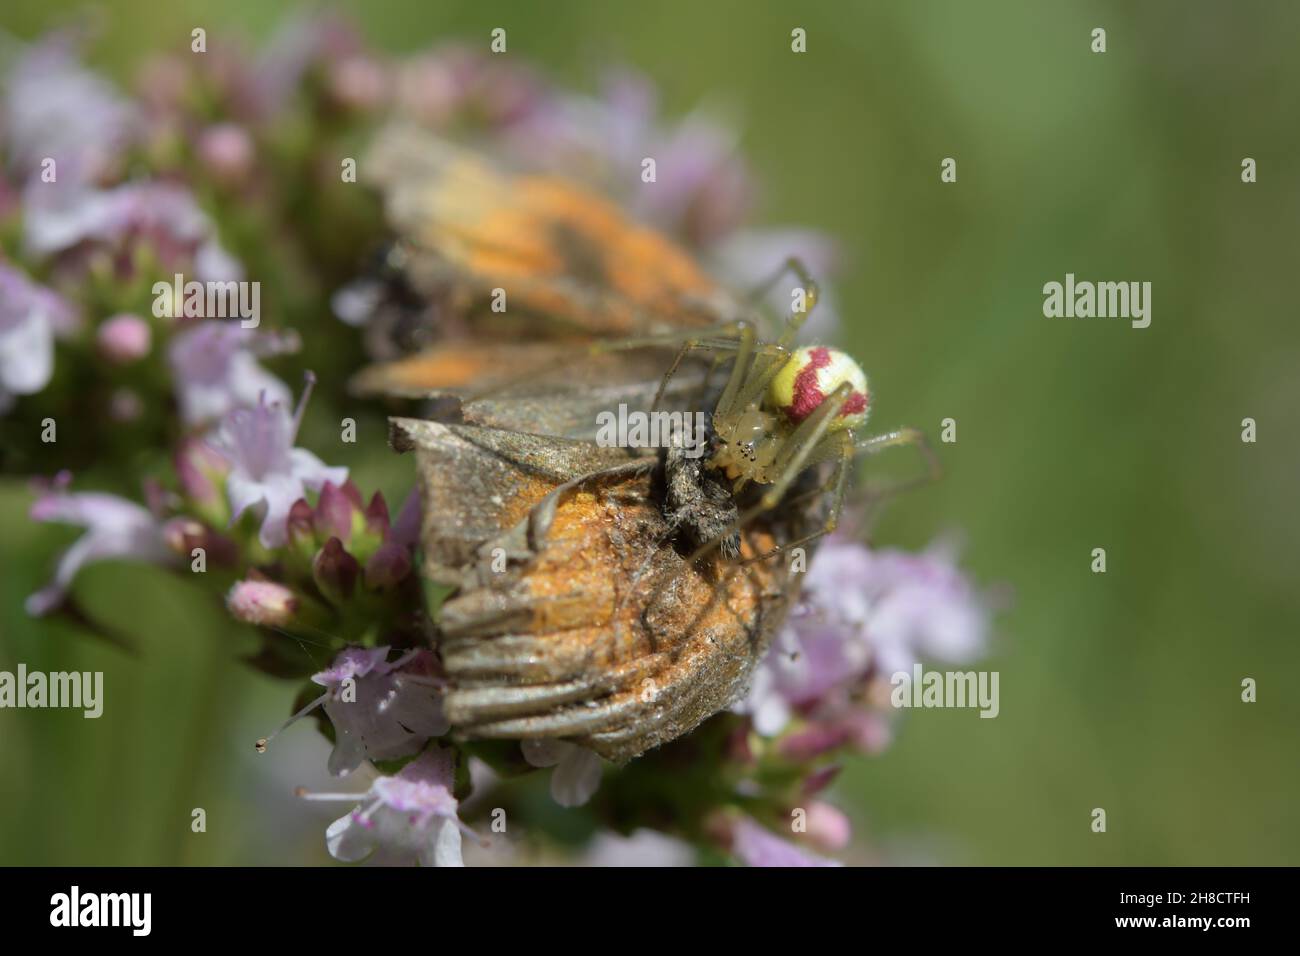 Closeup of an enoplognatha ovata spider attacking a moth on flowers Stock Photo